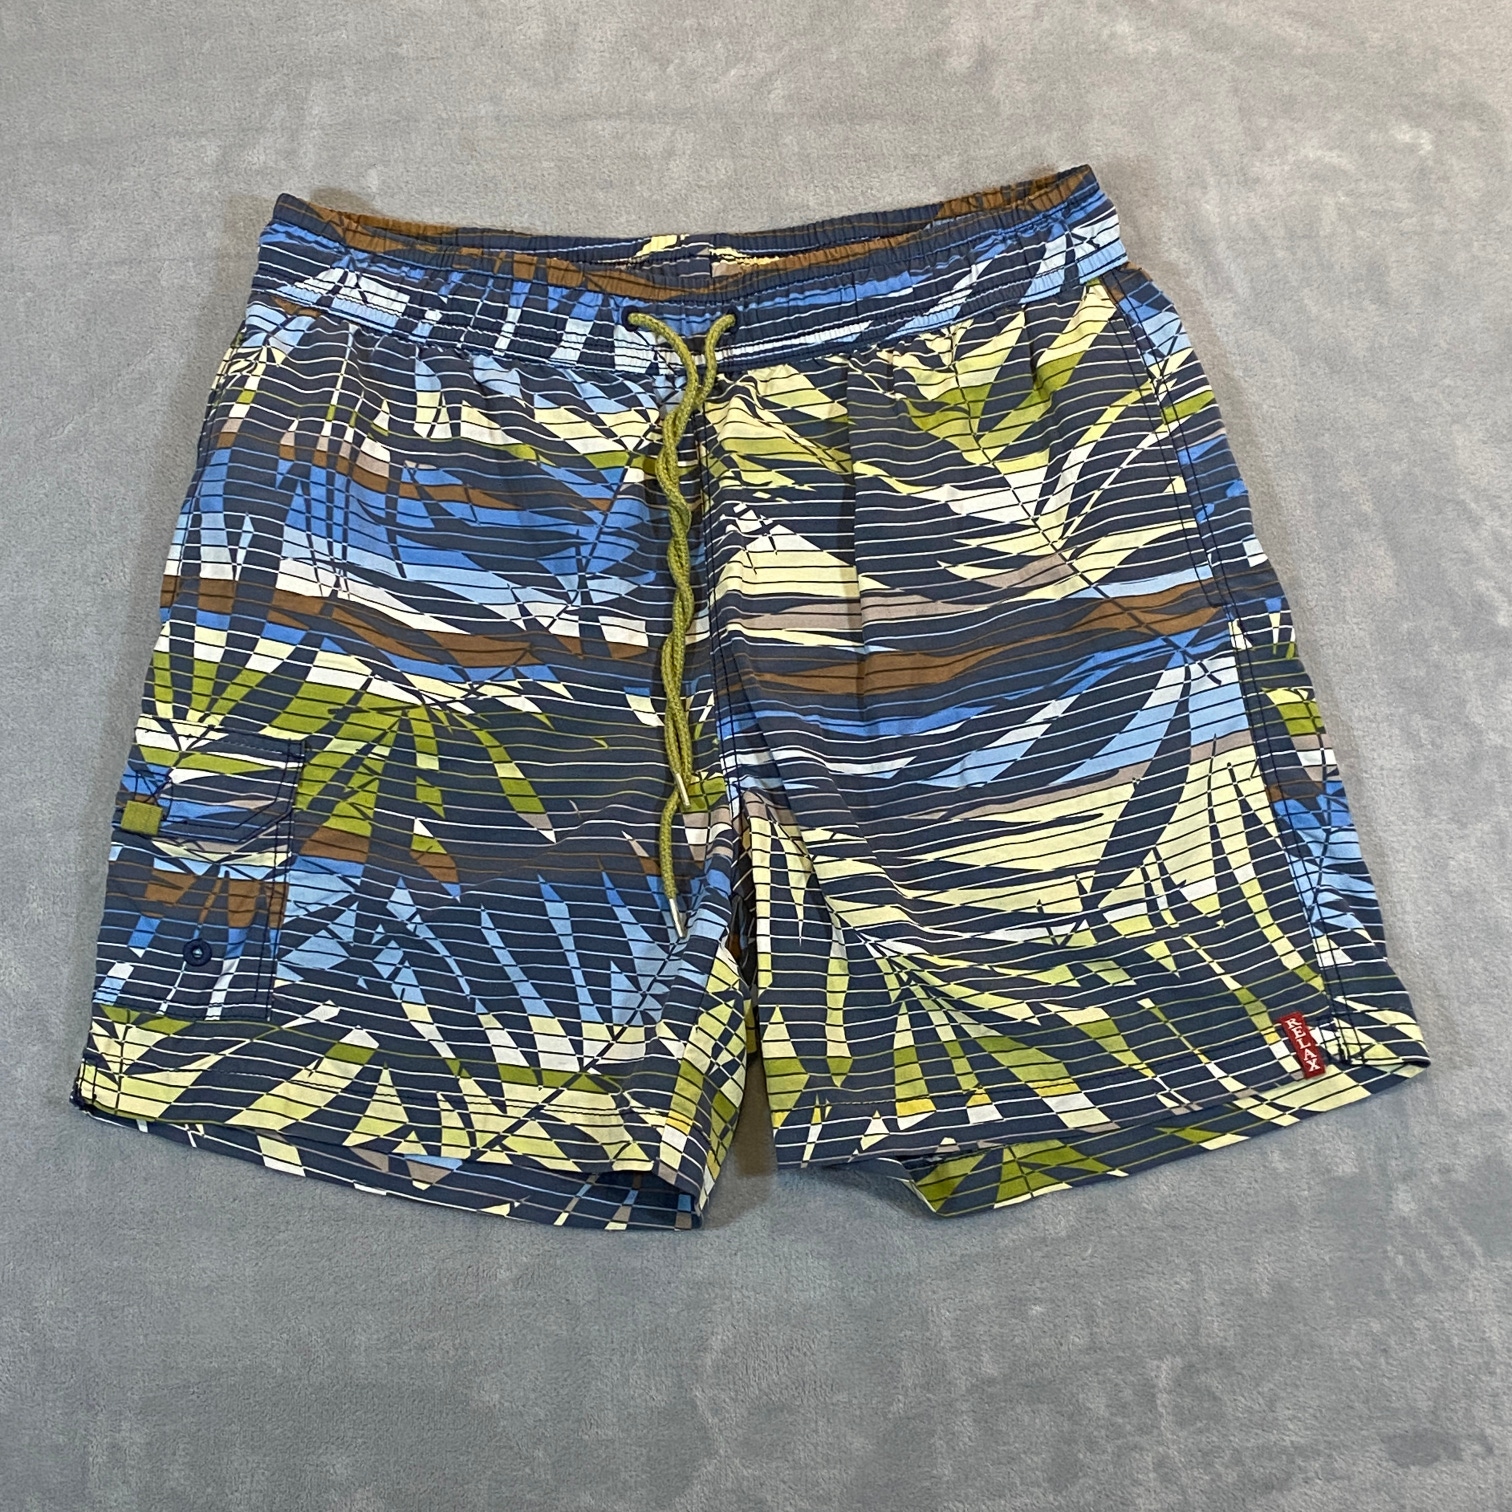 Tommy Bahama Relax Board Shorts Mens Large Floral Nylon Mesh-Lined Swim Trunks